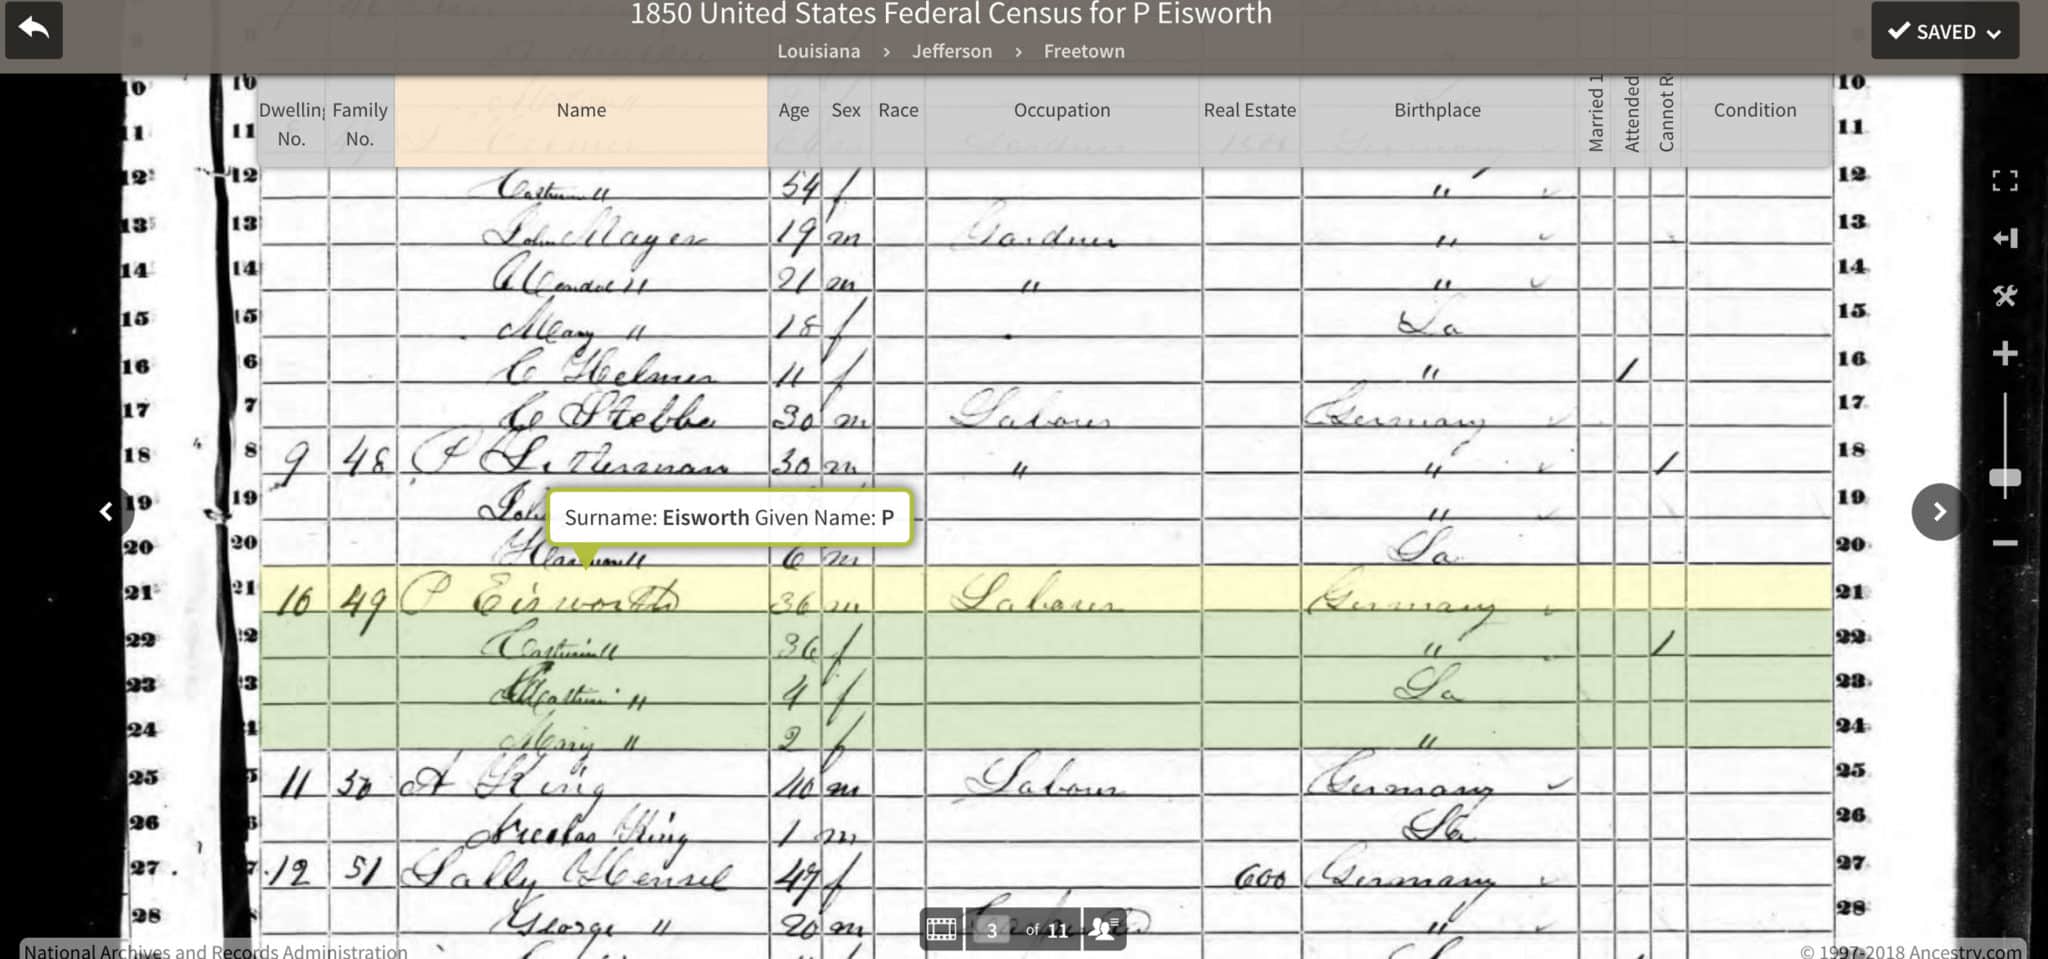 p-and-catherine-eisworth-on-1850-census-with-daughters-mary-and-catherine